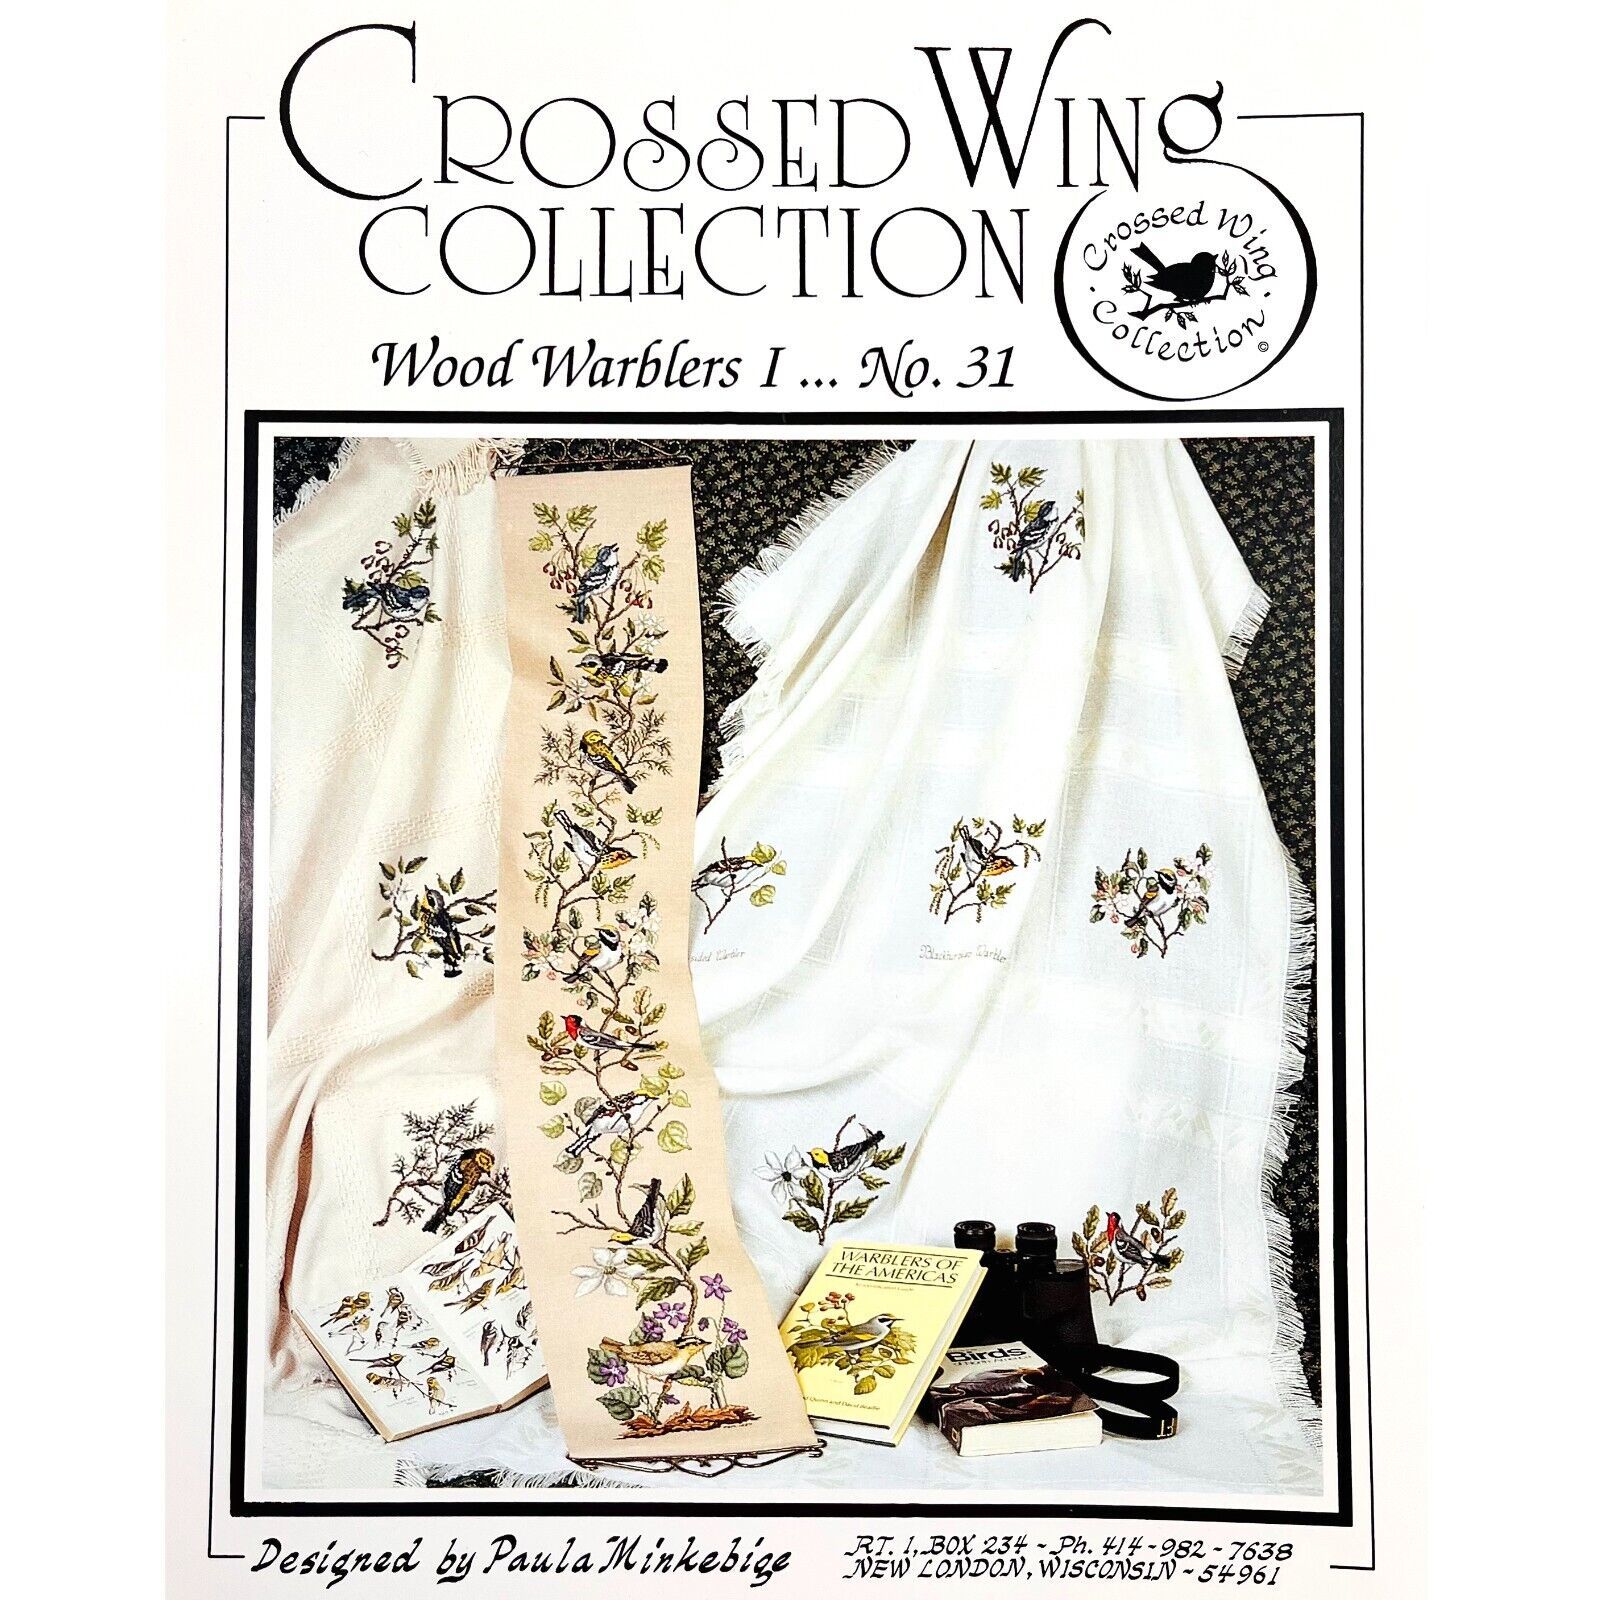 Wood Warblers 1 No. 31 Cross Stitch Embroidery PATTERN Crossed Wing Collection - $9.99